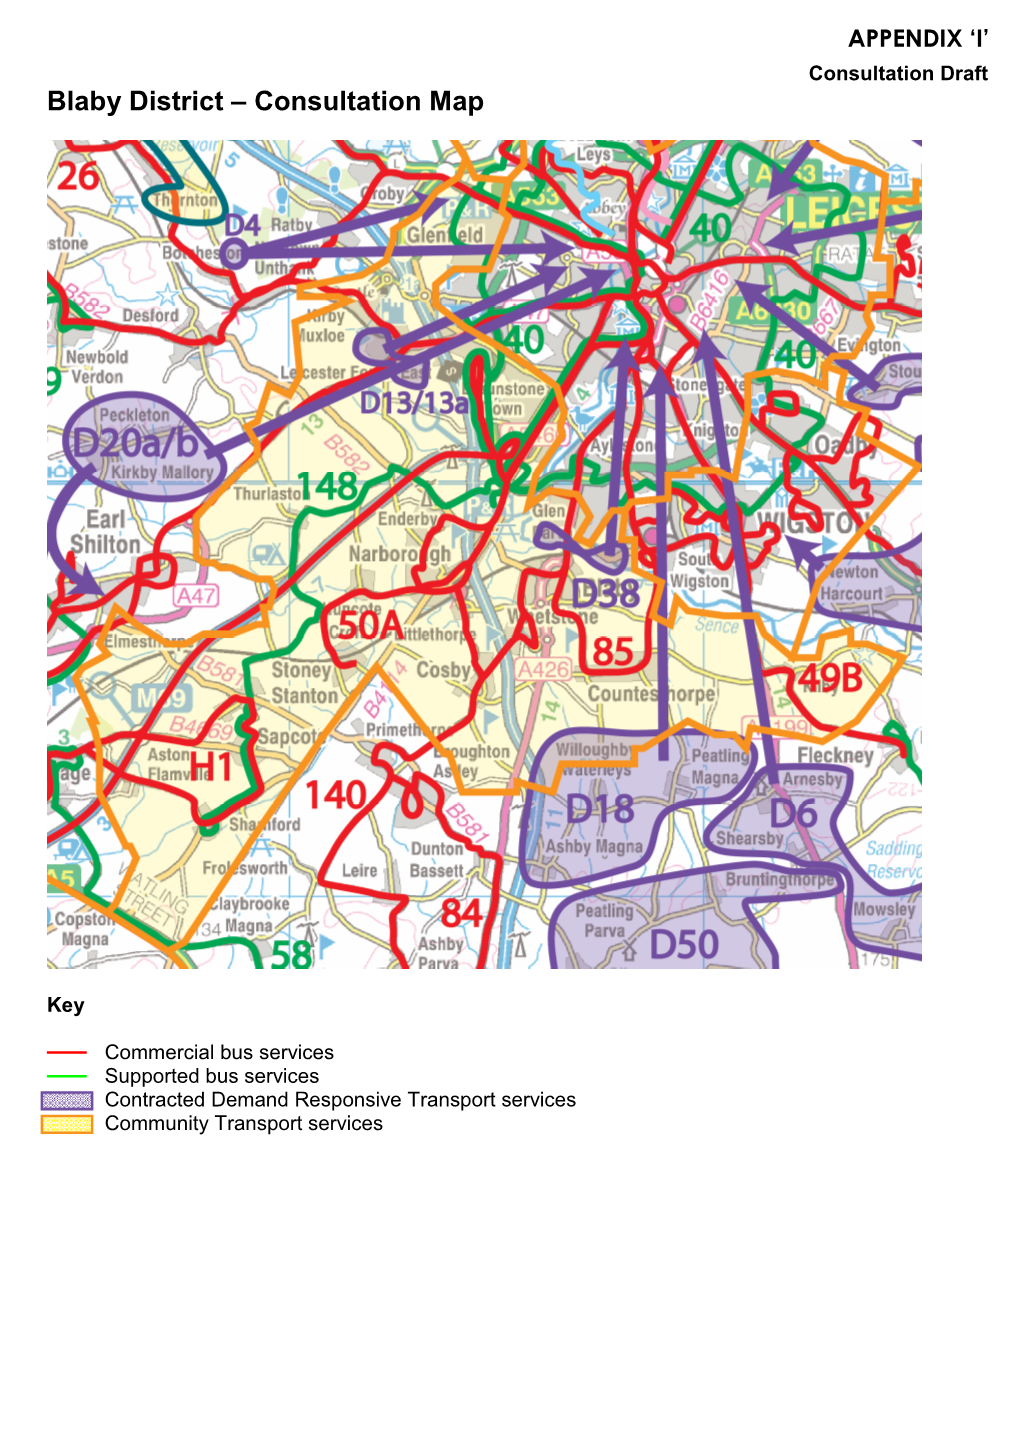 Blaby District – Consultation Map